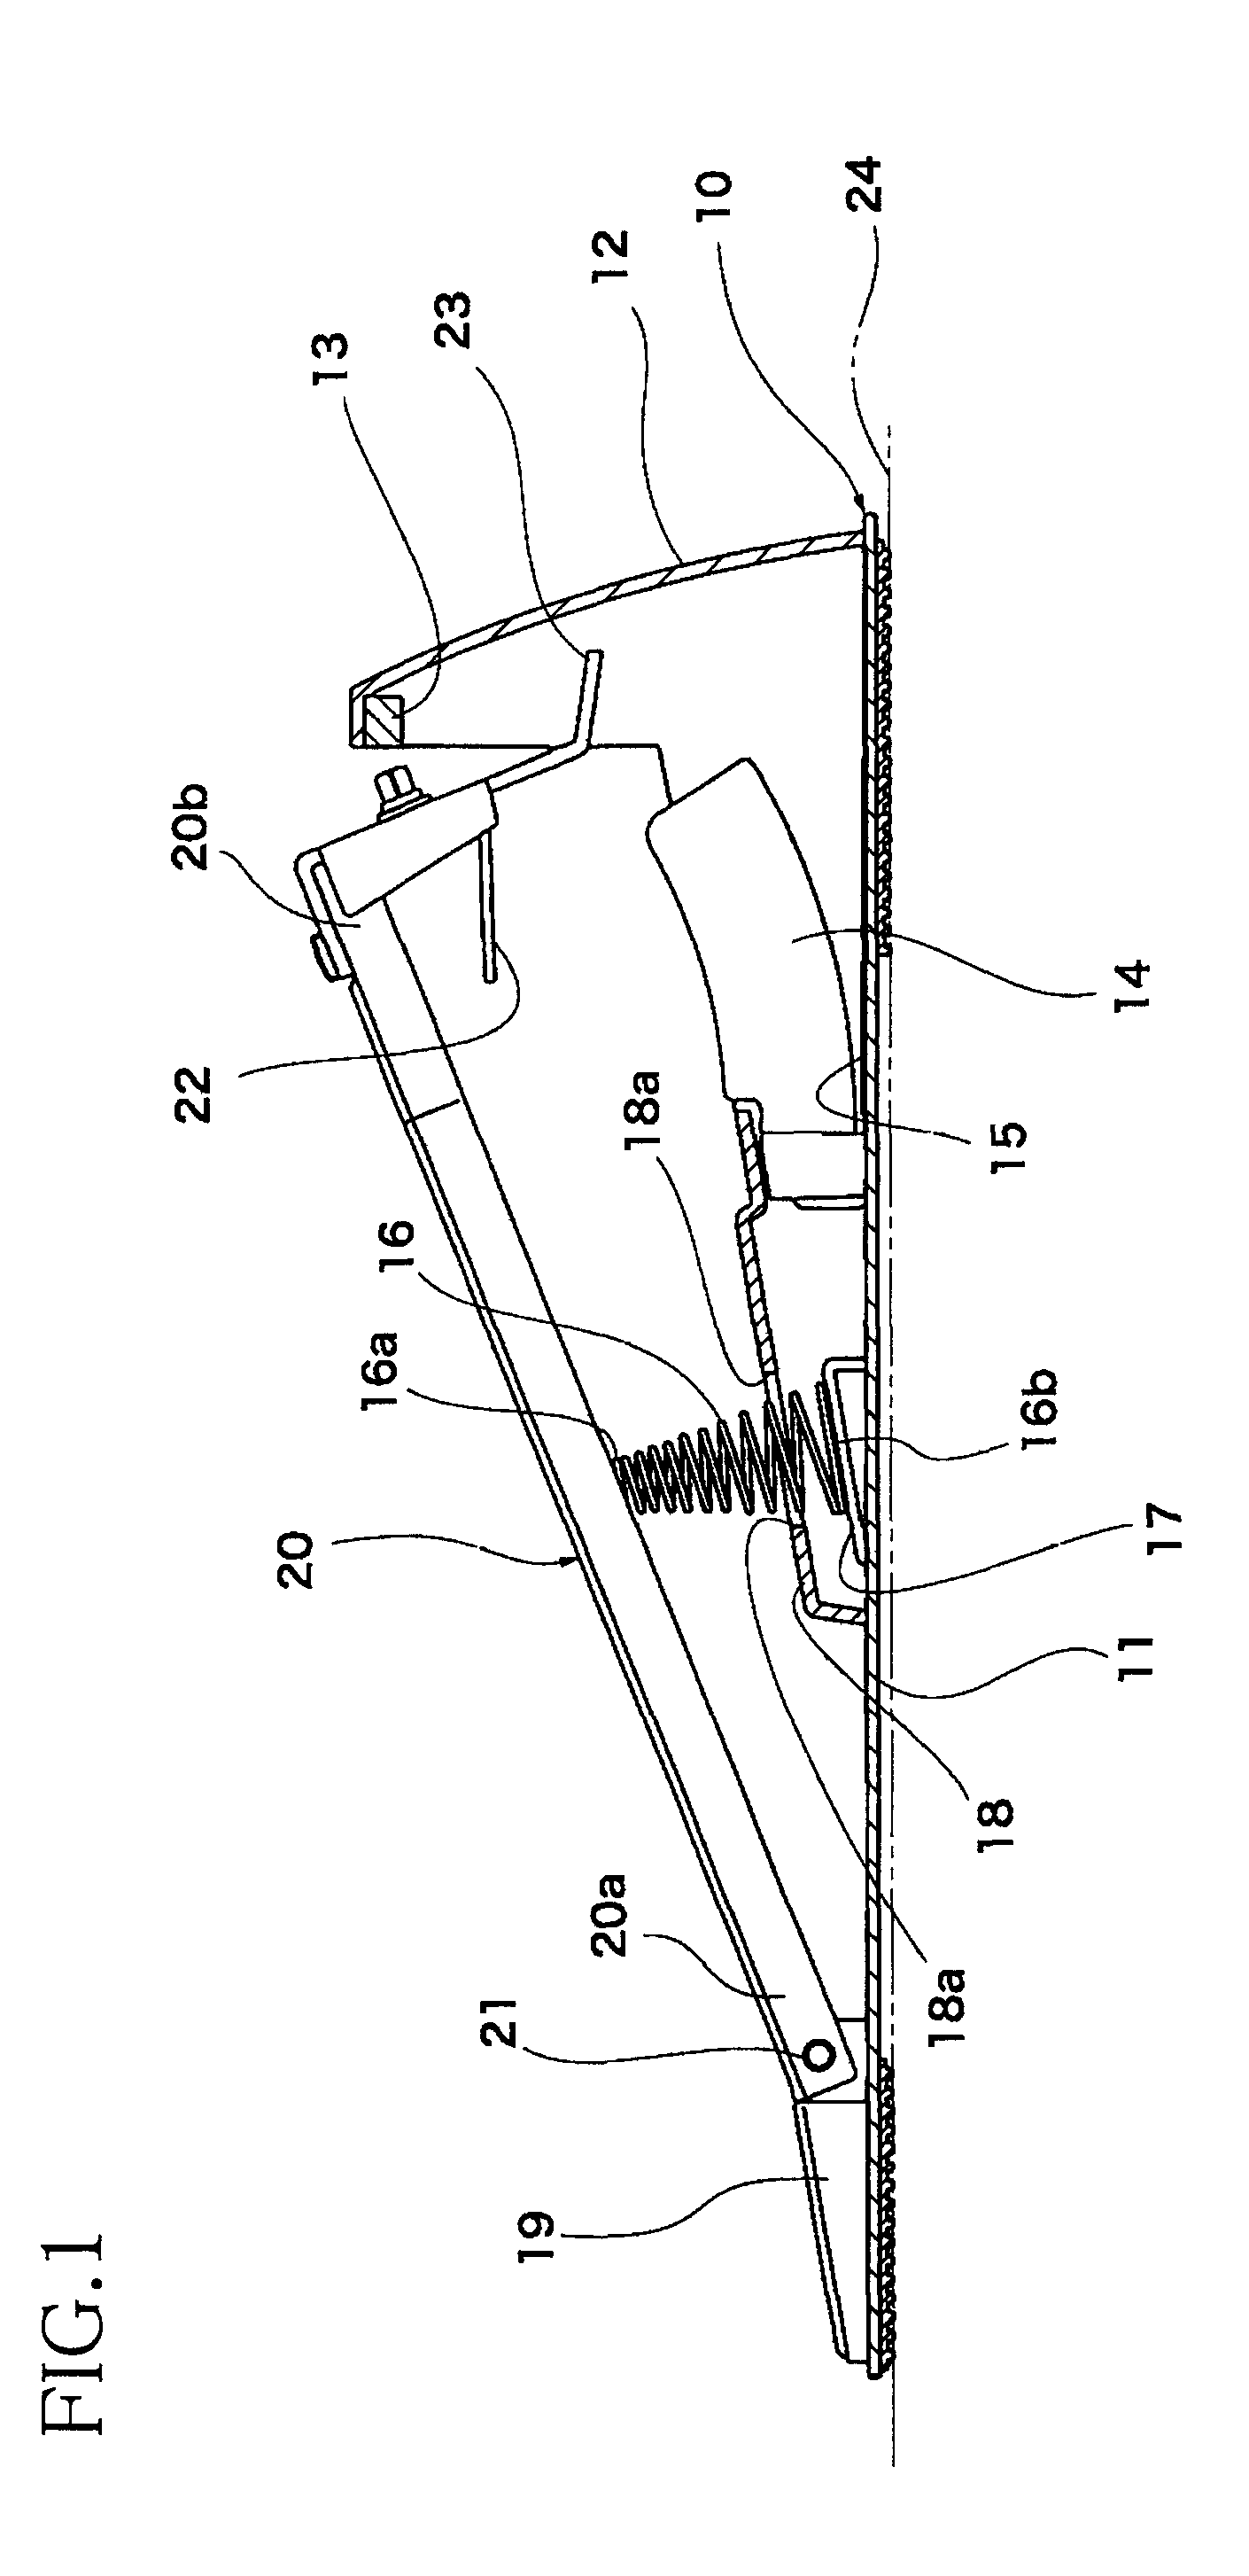 Pedal device for electronic percussion instrument